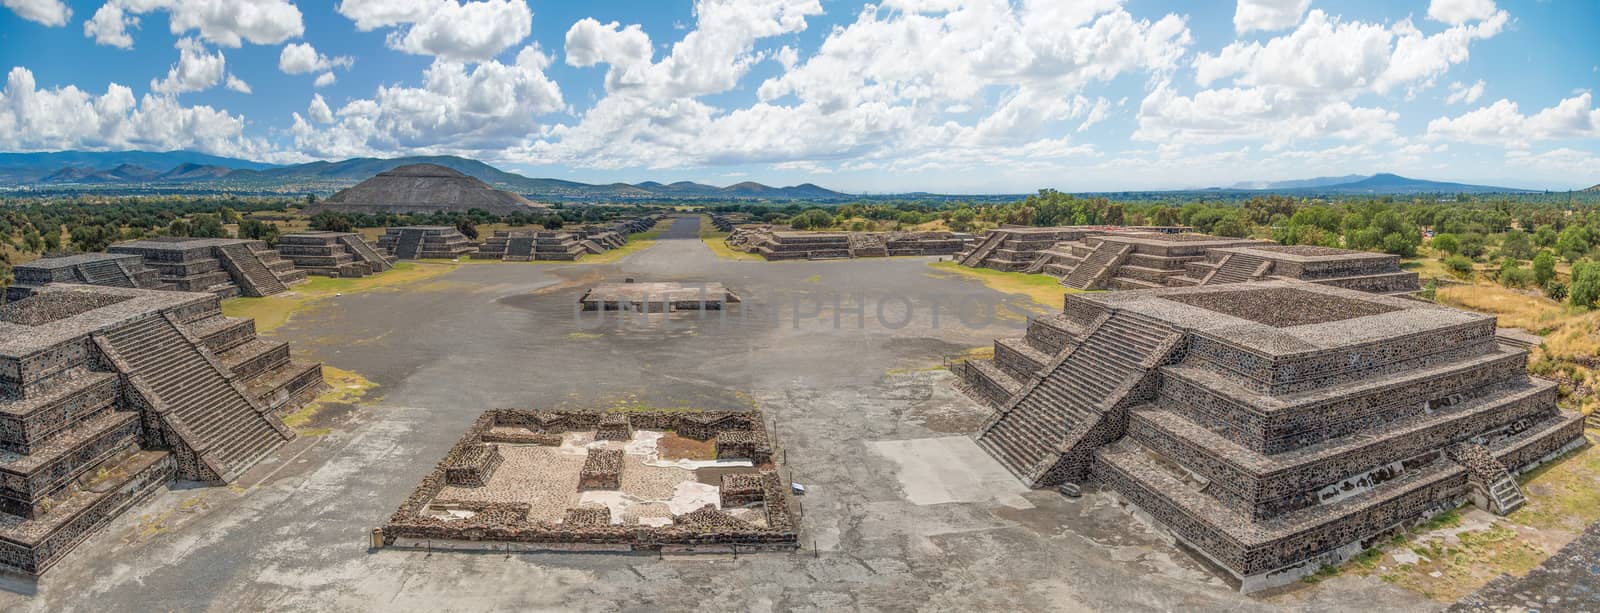 Teotihuacan Avenue of the Dead by whitechild